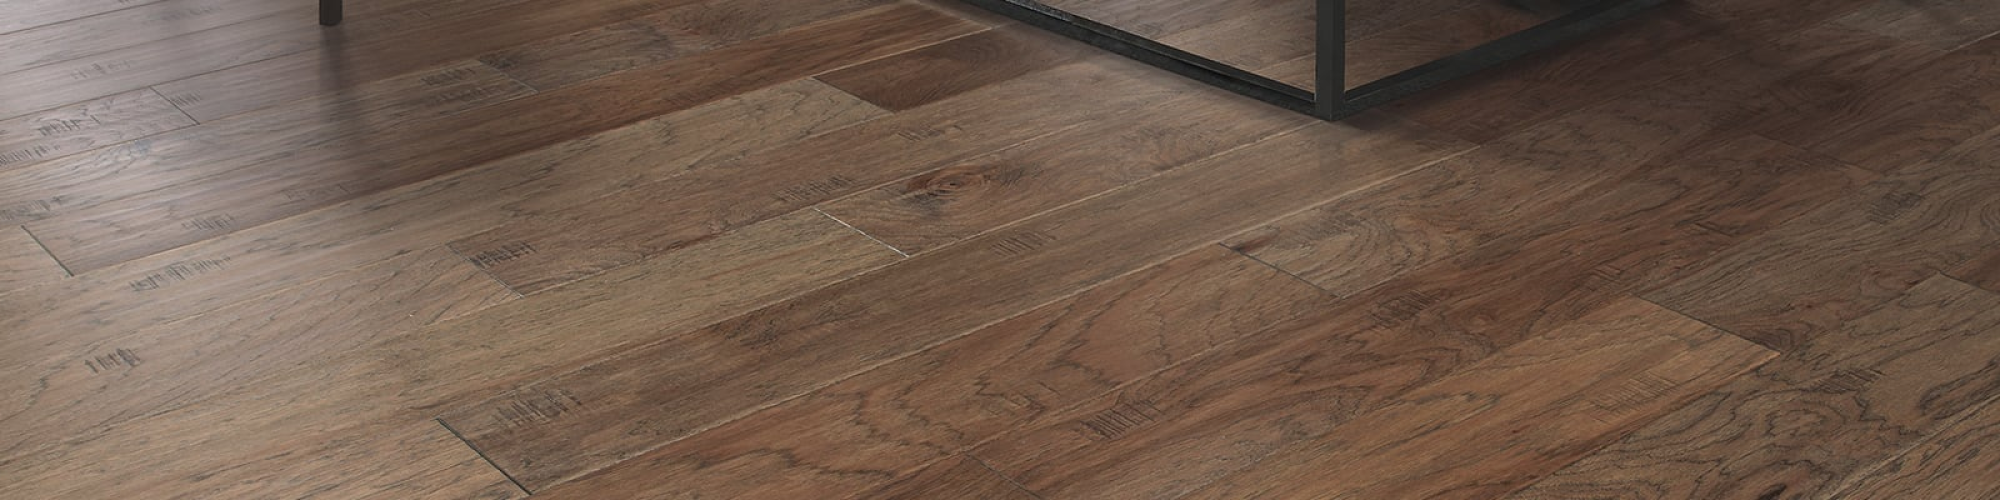 Convenient Financing Options Available* provided by Inserra's Flooring Outlet